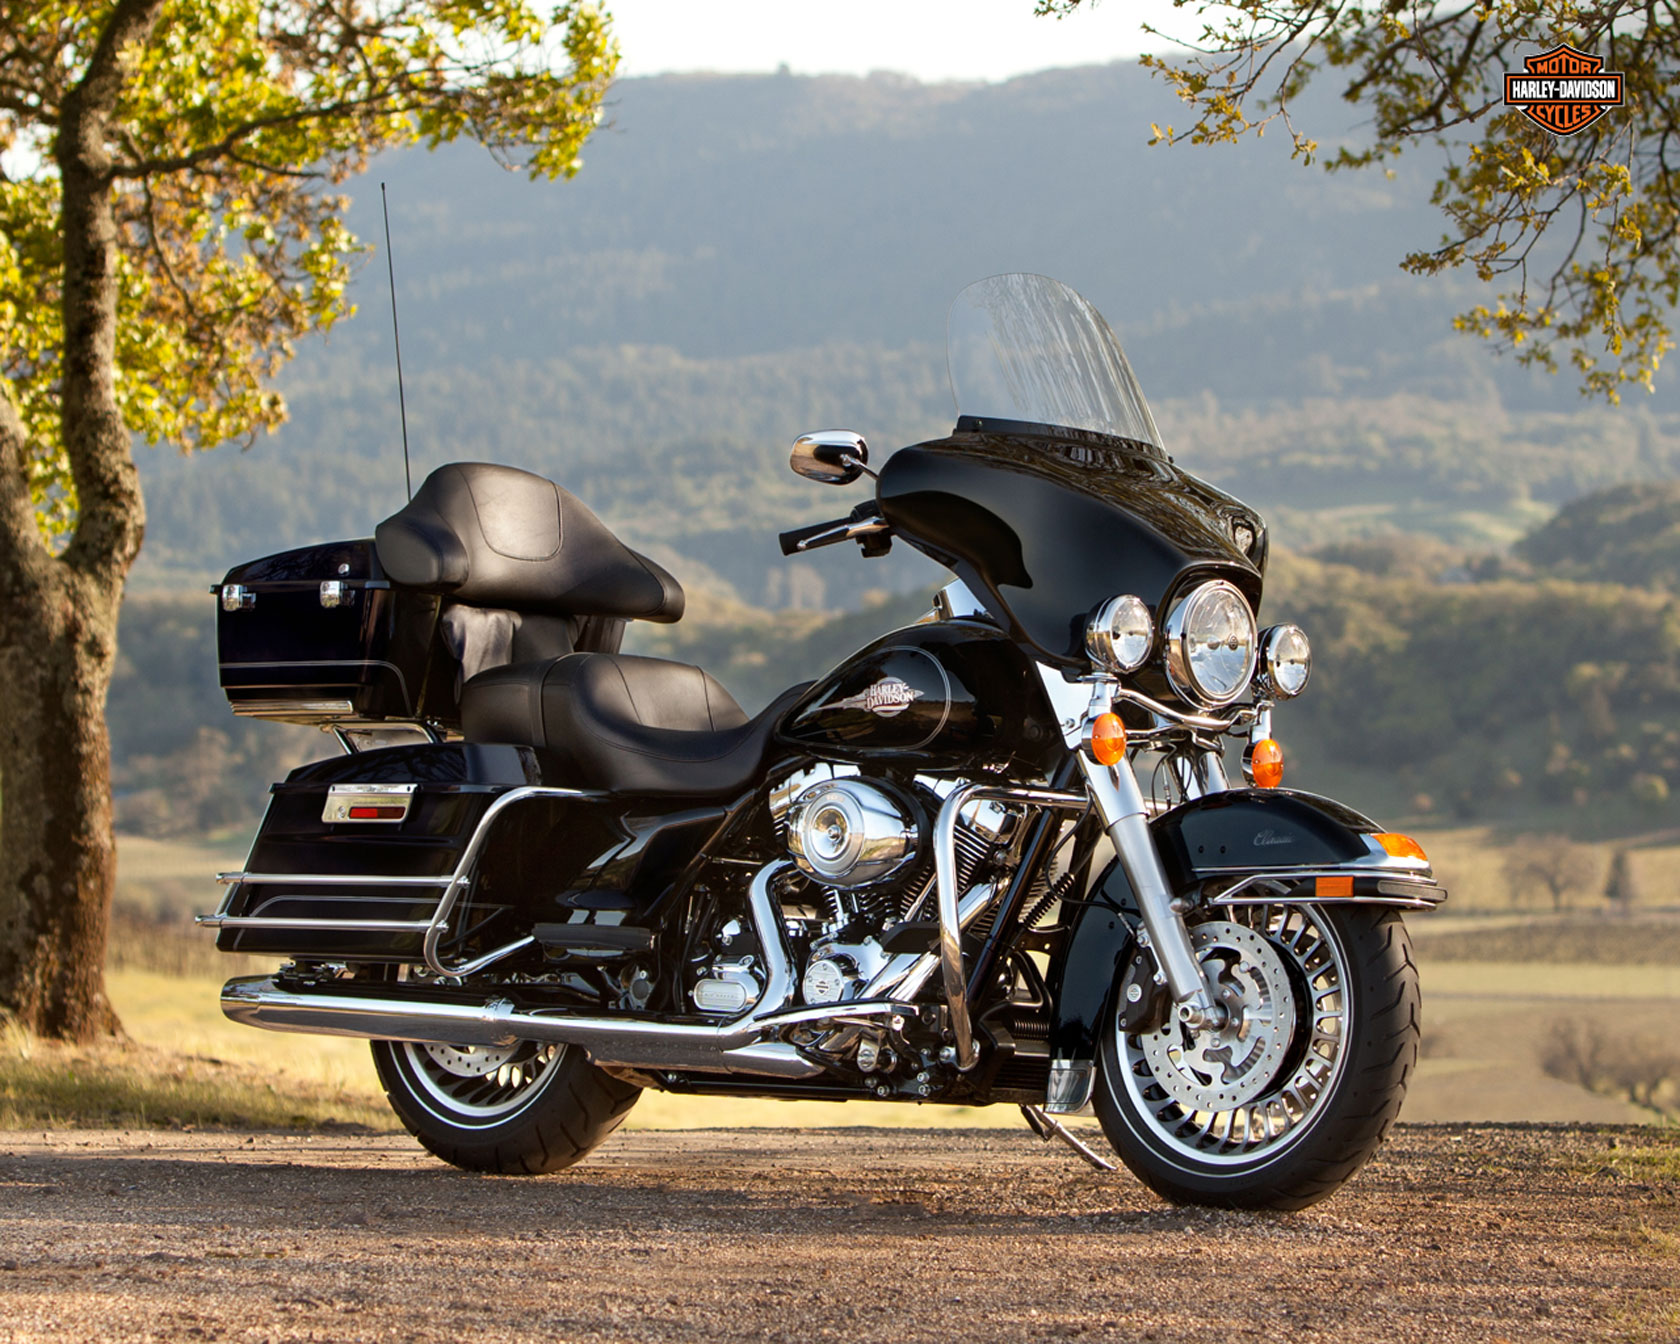 2013 Harley Davidson Flhtc Electra Glide Classic Review